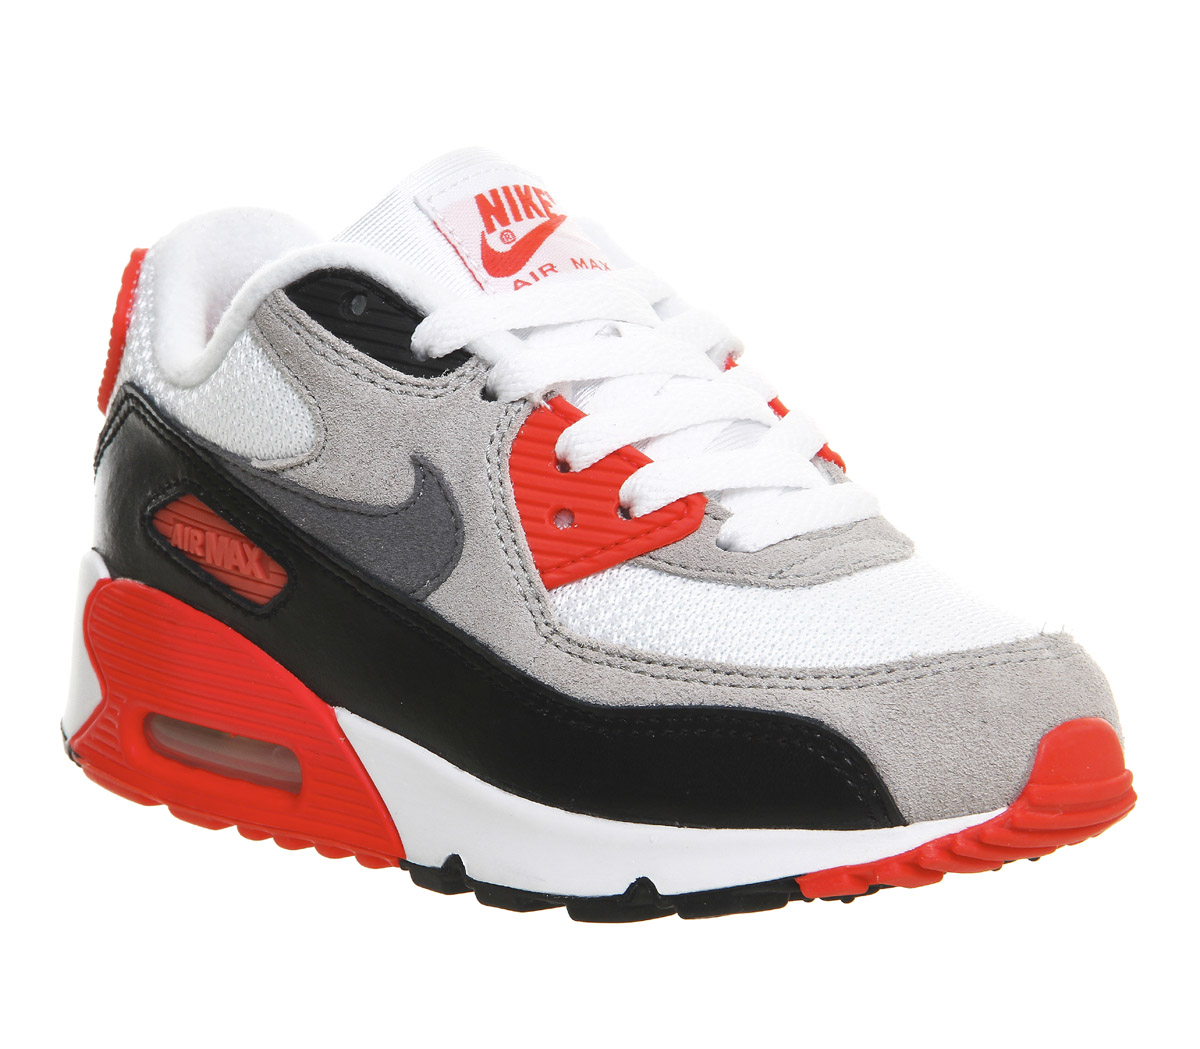 NikeAir Max 90 PsInfra Red 25th Anniversary